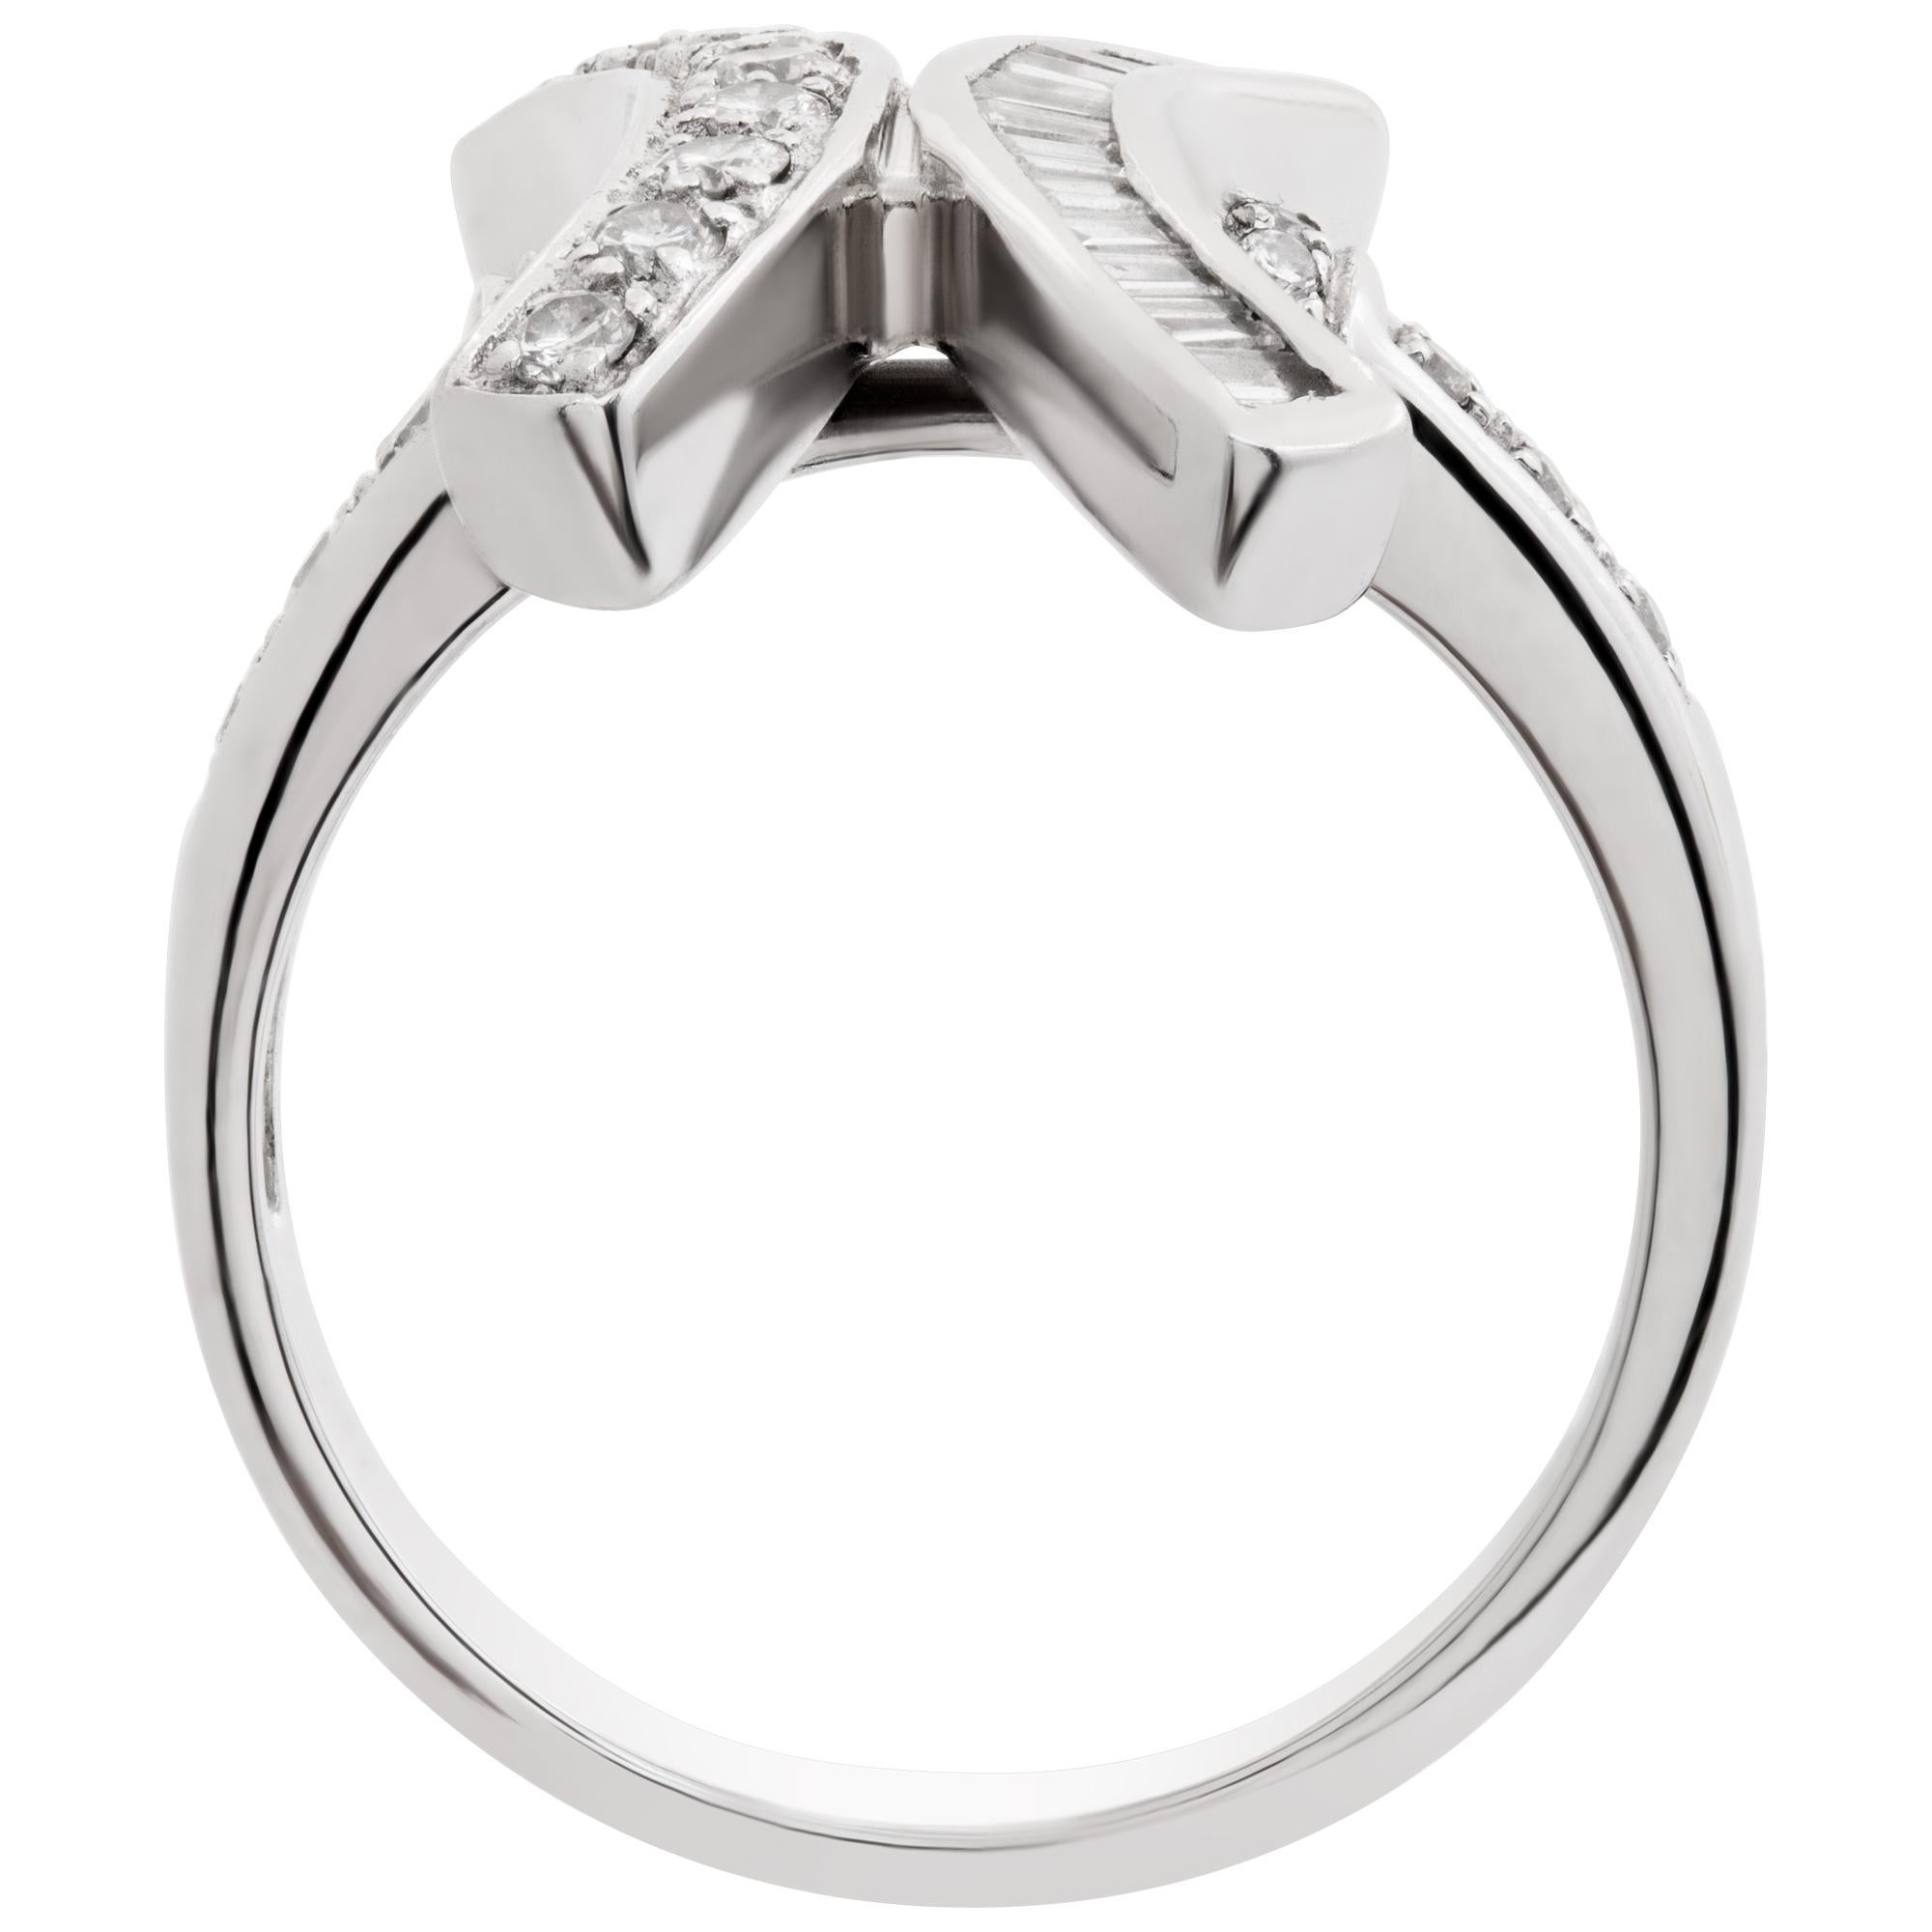 Round Cut X Shaped Diamond Ring in 18k White Gold, 0.30 Carats in Diamonds For Sale